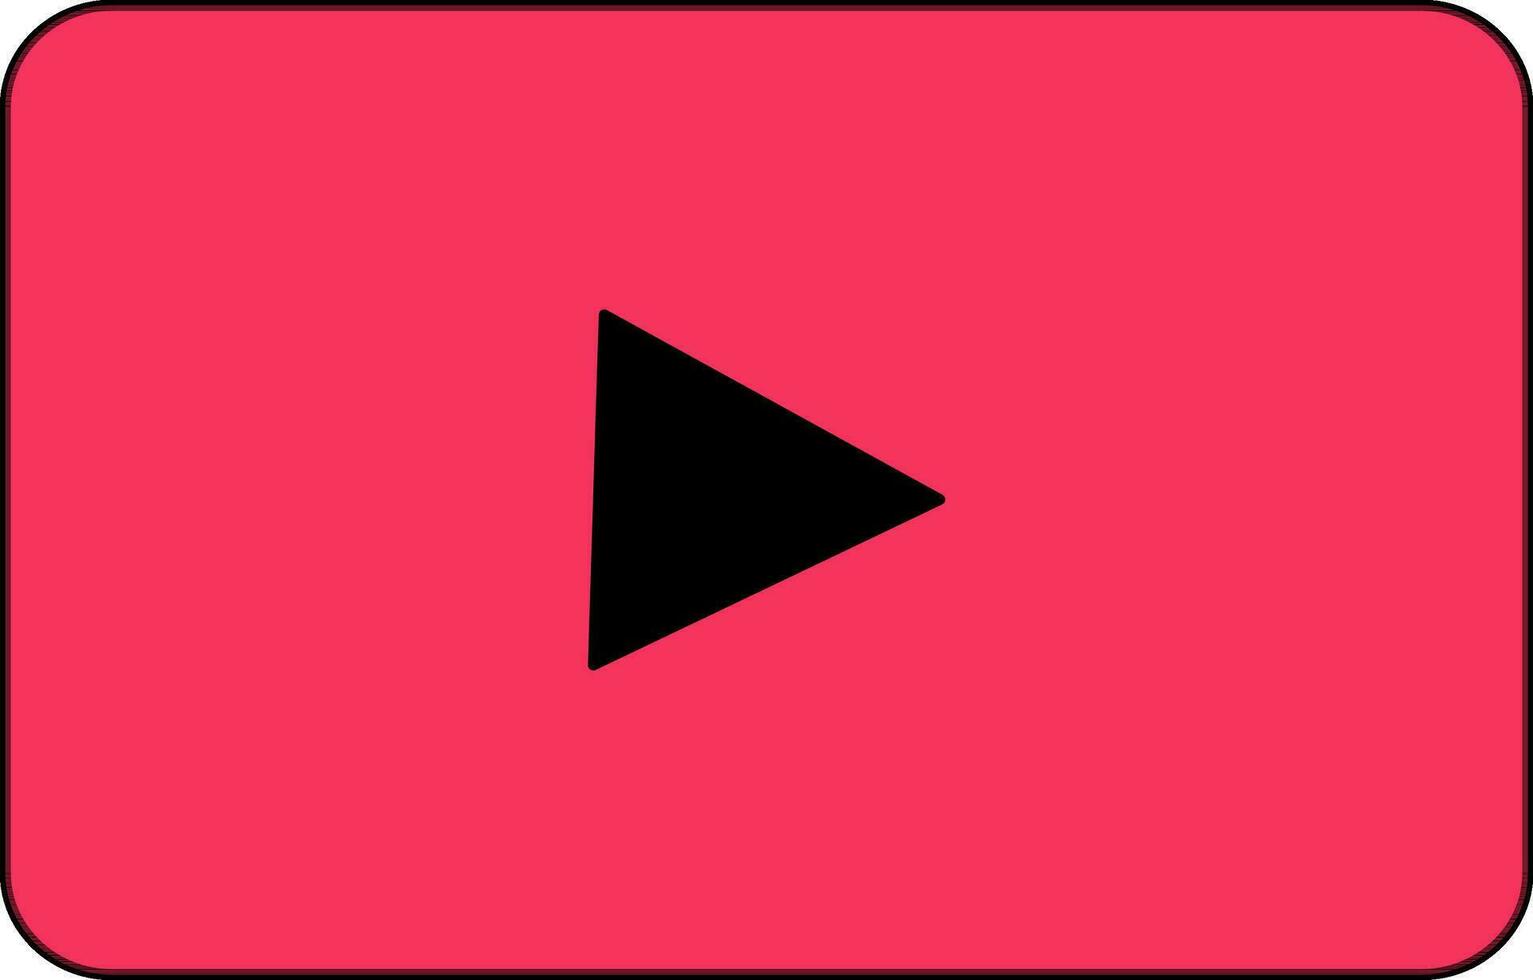 Black and pink youtube icon in flat style. vector